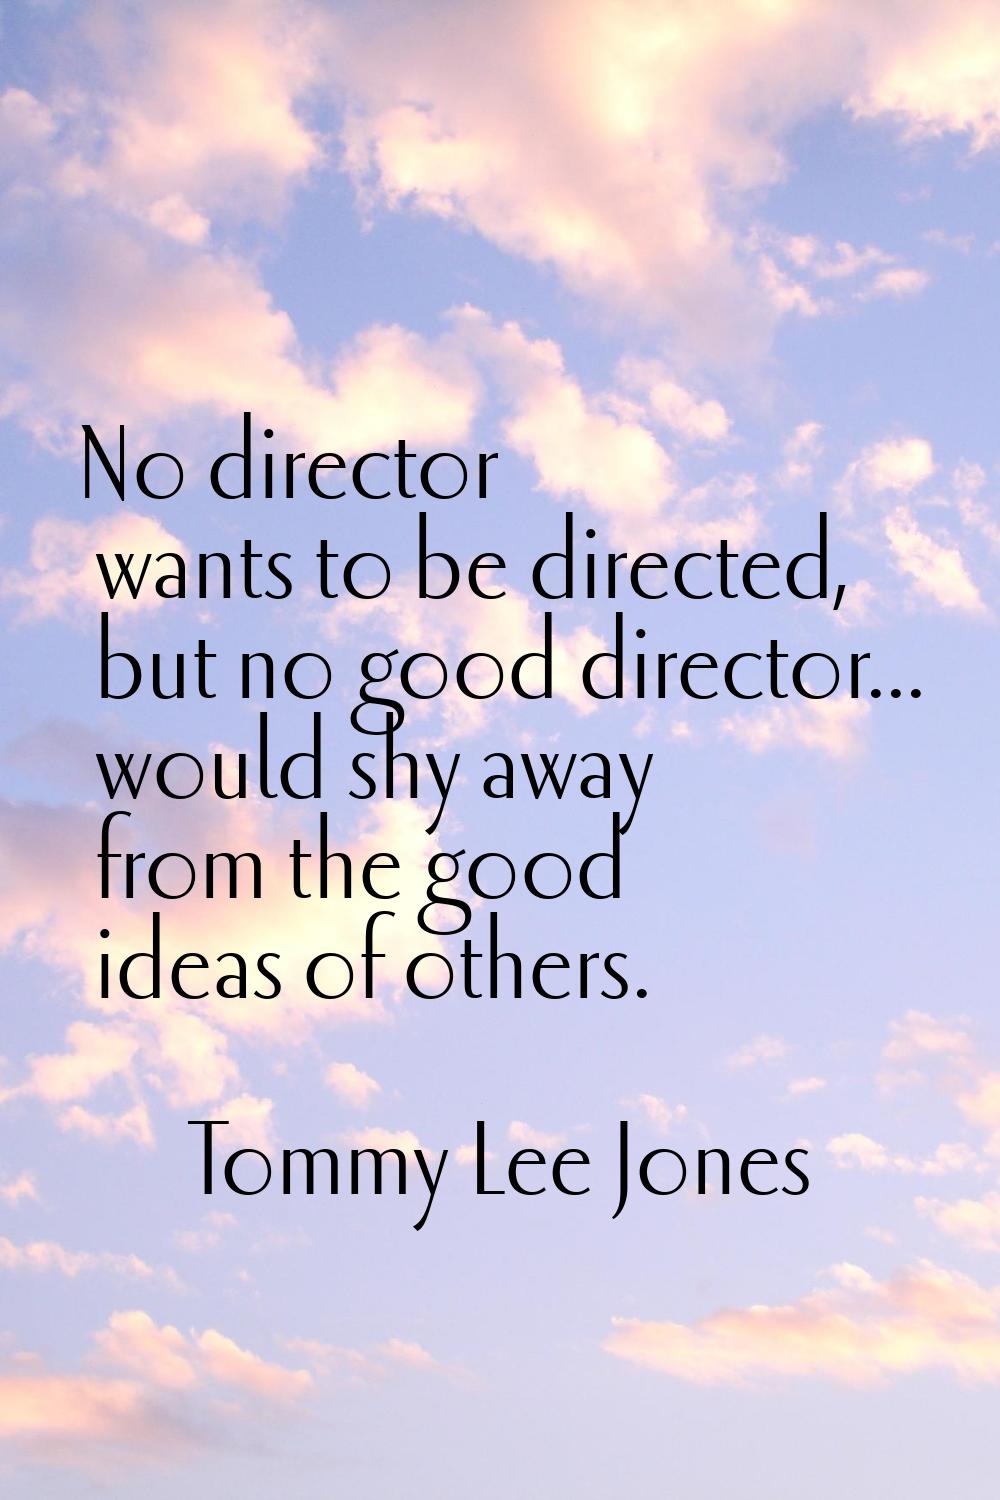 No director wants to be directed, but no good director... would shy away from the good ideas of oth